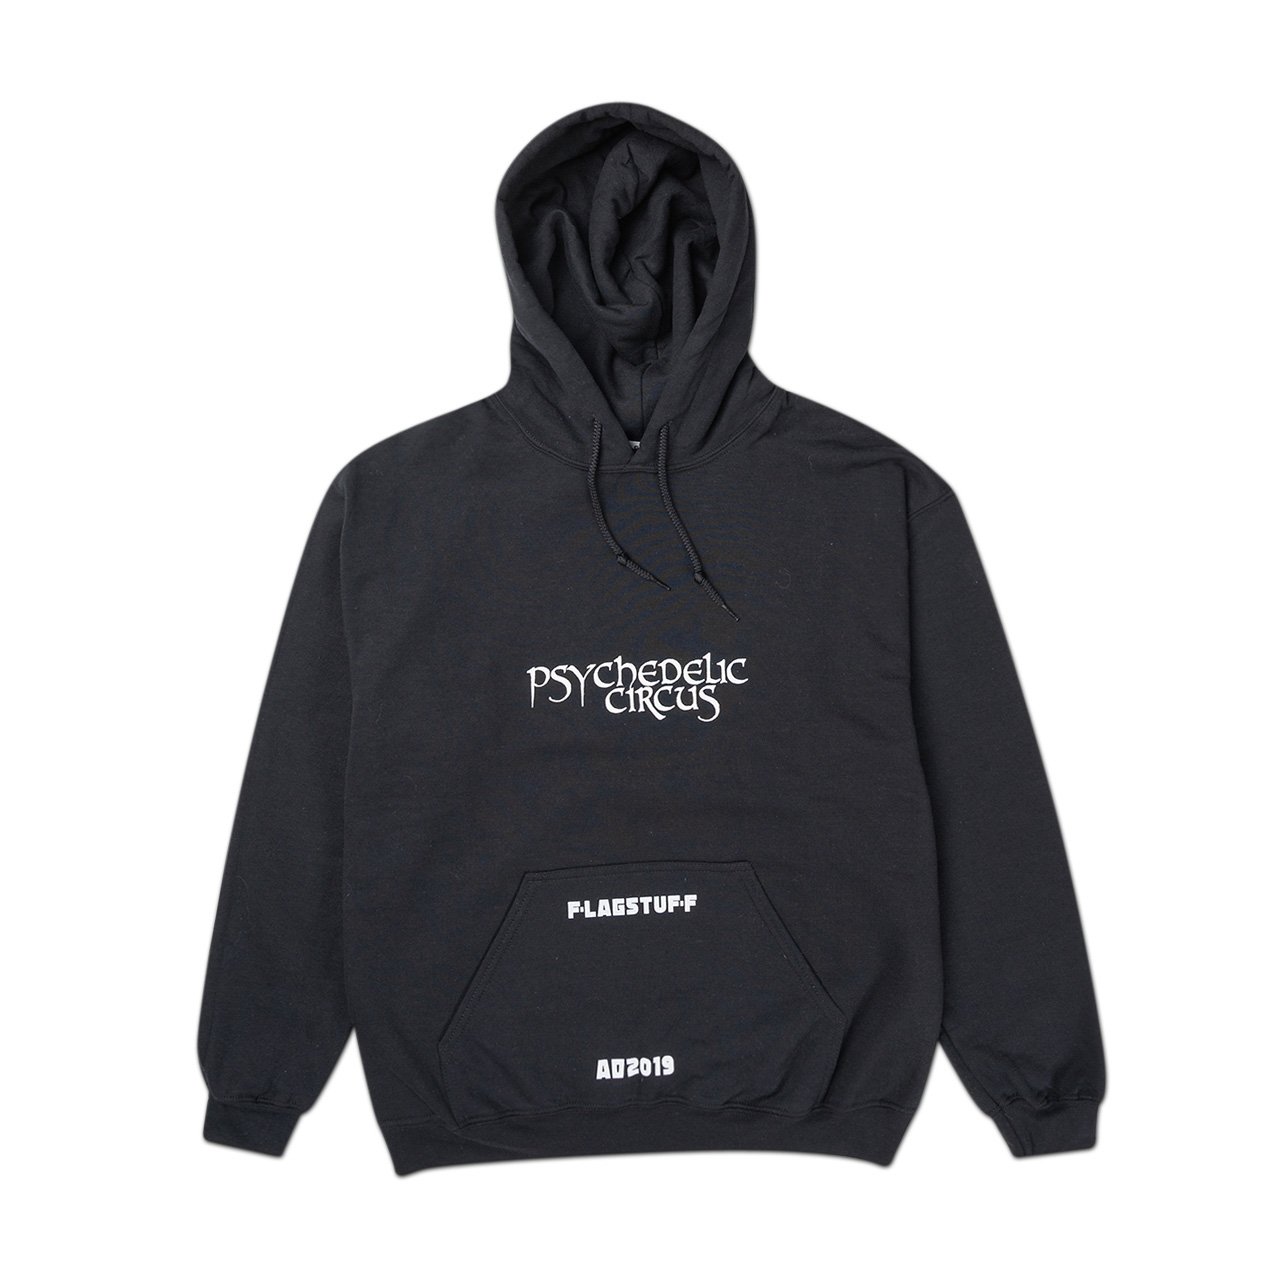 flagstuff "supper" hoodie (black) - 19aw-fs-40 - a.plus - Image - 1